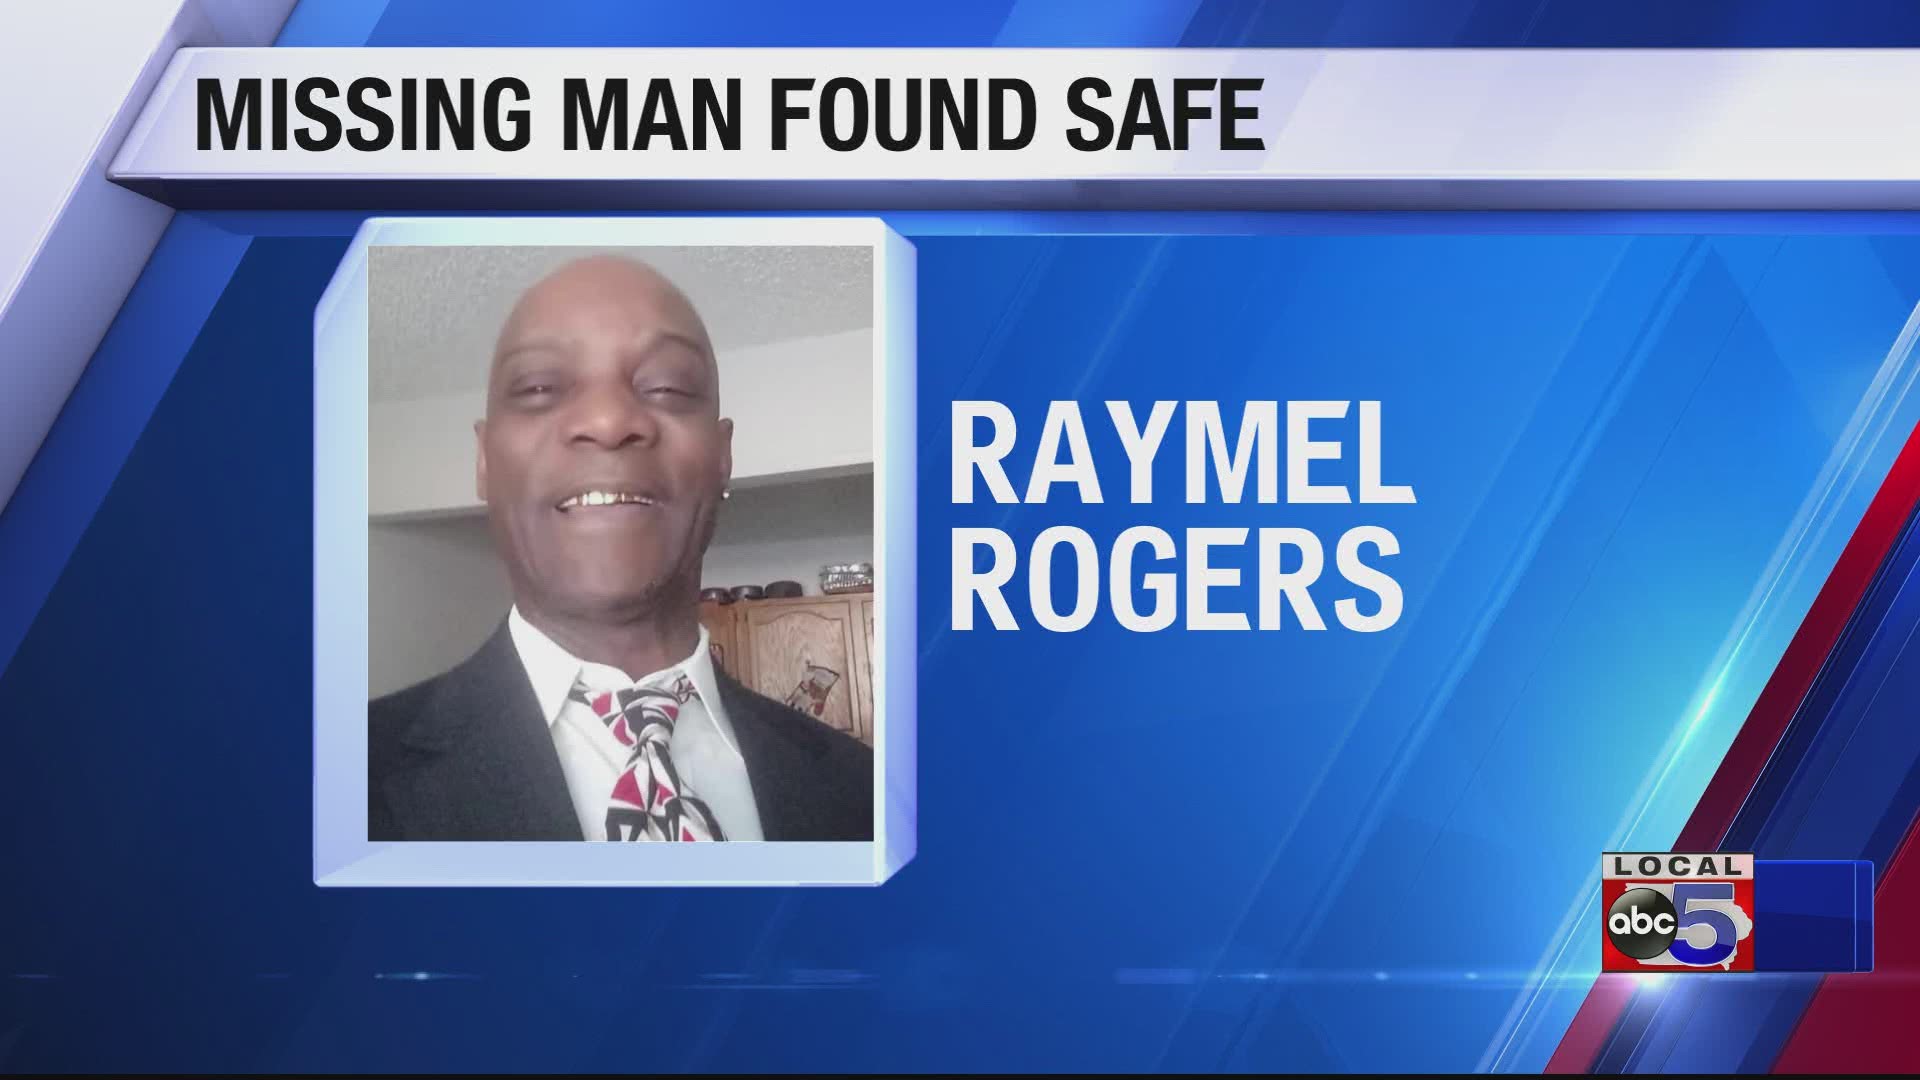 Raymel Rogers was reunited with his family on Wednesday, police said.